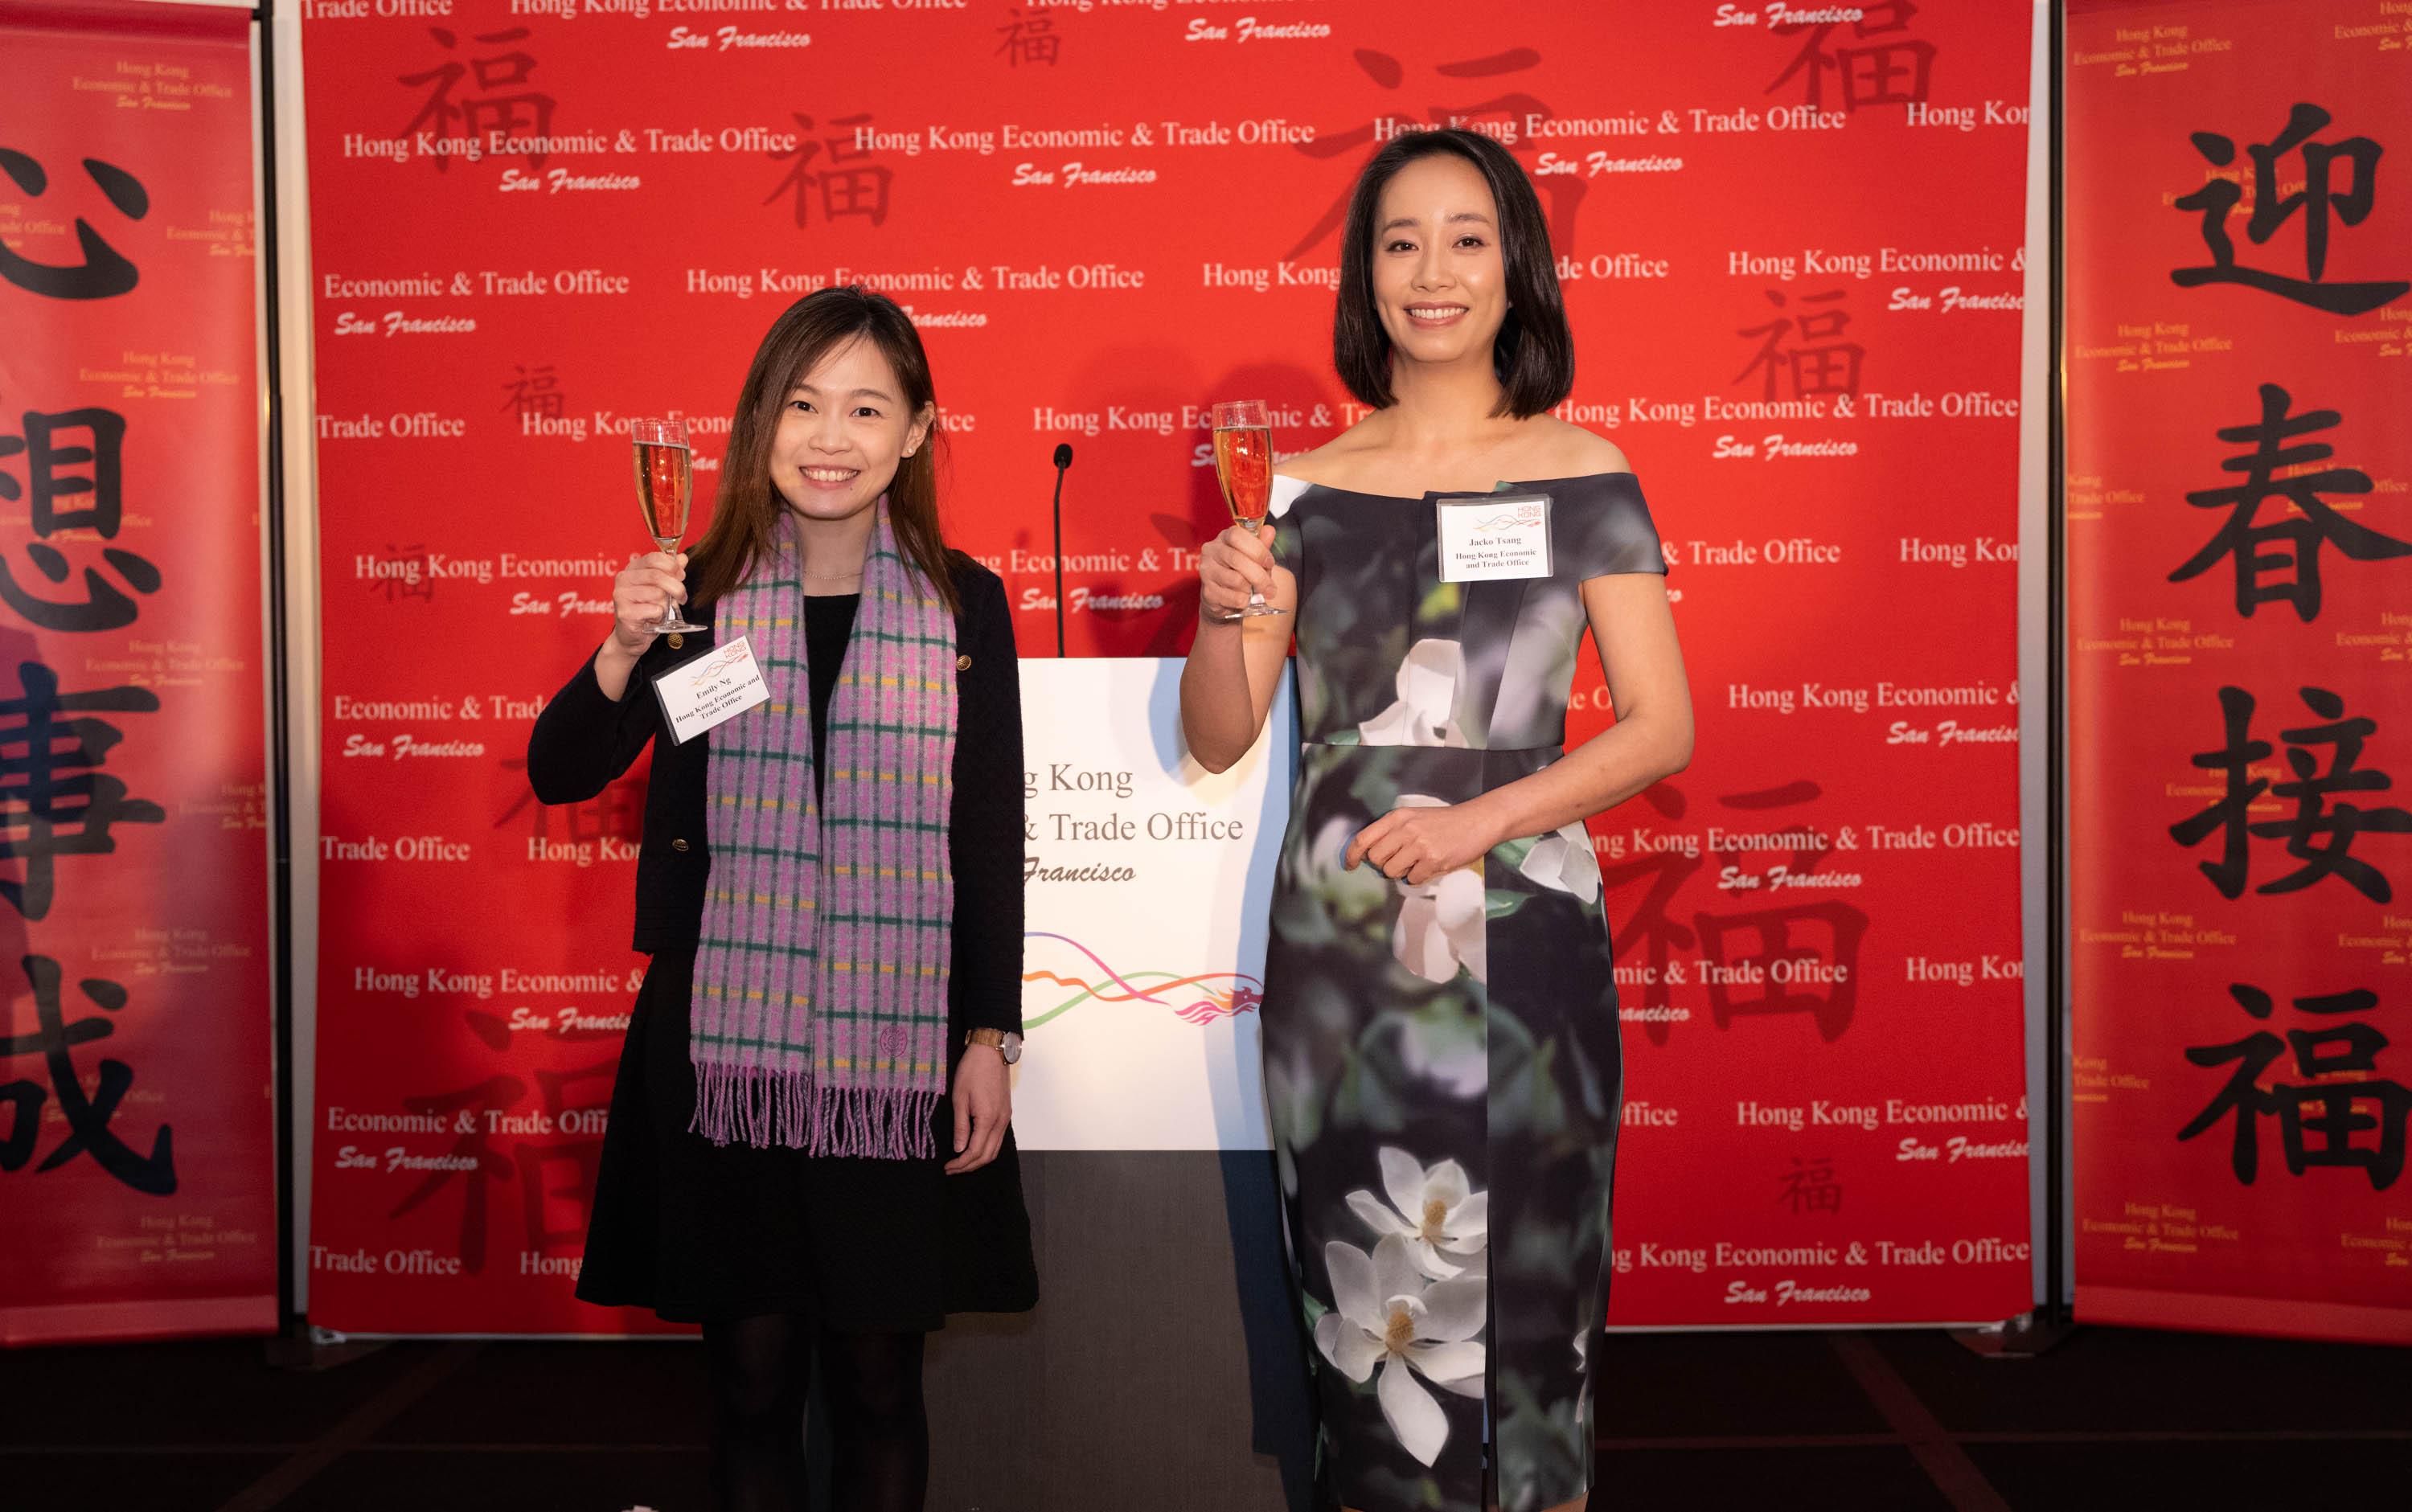 The Director of the Hong Kong Economic and Trade Office in San Francisco, Ms Jacko Tsang (right), and the Deputy Director of the Hong Kong Economic and Trade Office in San Francisco, Ms Emily Ng (left), give a celebratory toast to welcome the Year of the Rabbit at the spring reception in Dallas on February 3 (Dallas time).